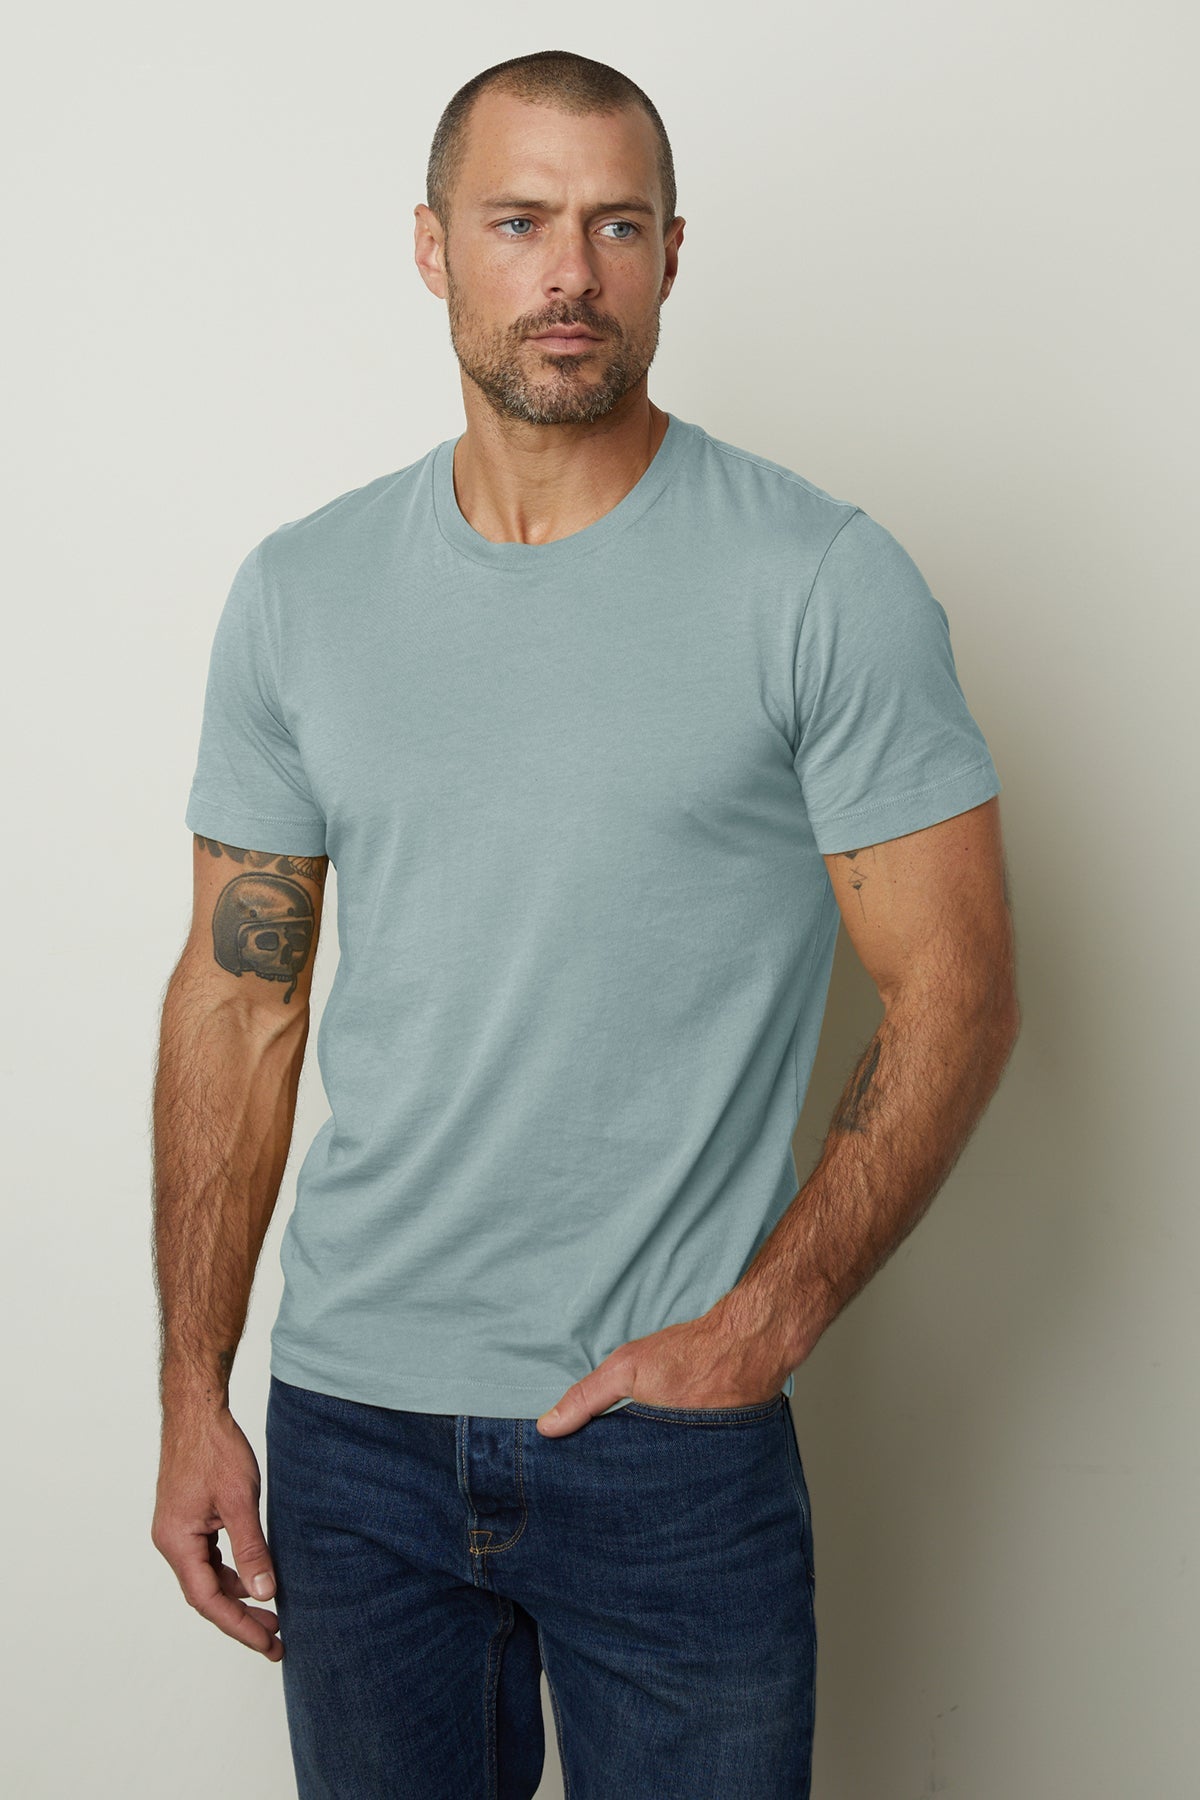 A man wearing the Velvet by Graham & Spencer HOWARD WHISPER CLASSIC CREW NECK TEE, made of lightweight cotton knit for a vintage-feel softness, paired with jeans.-35782849134785